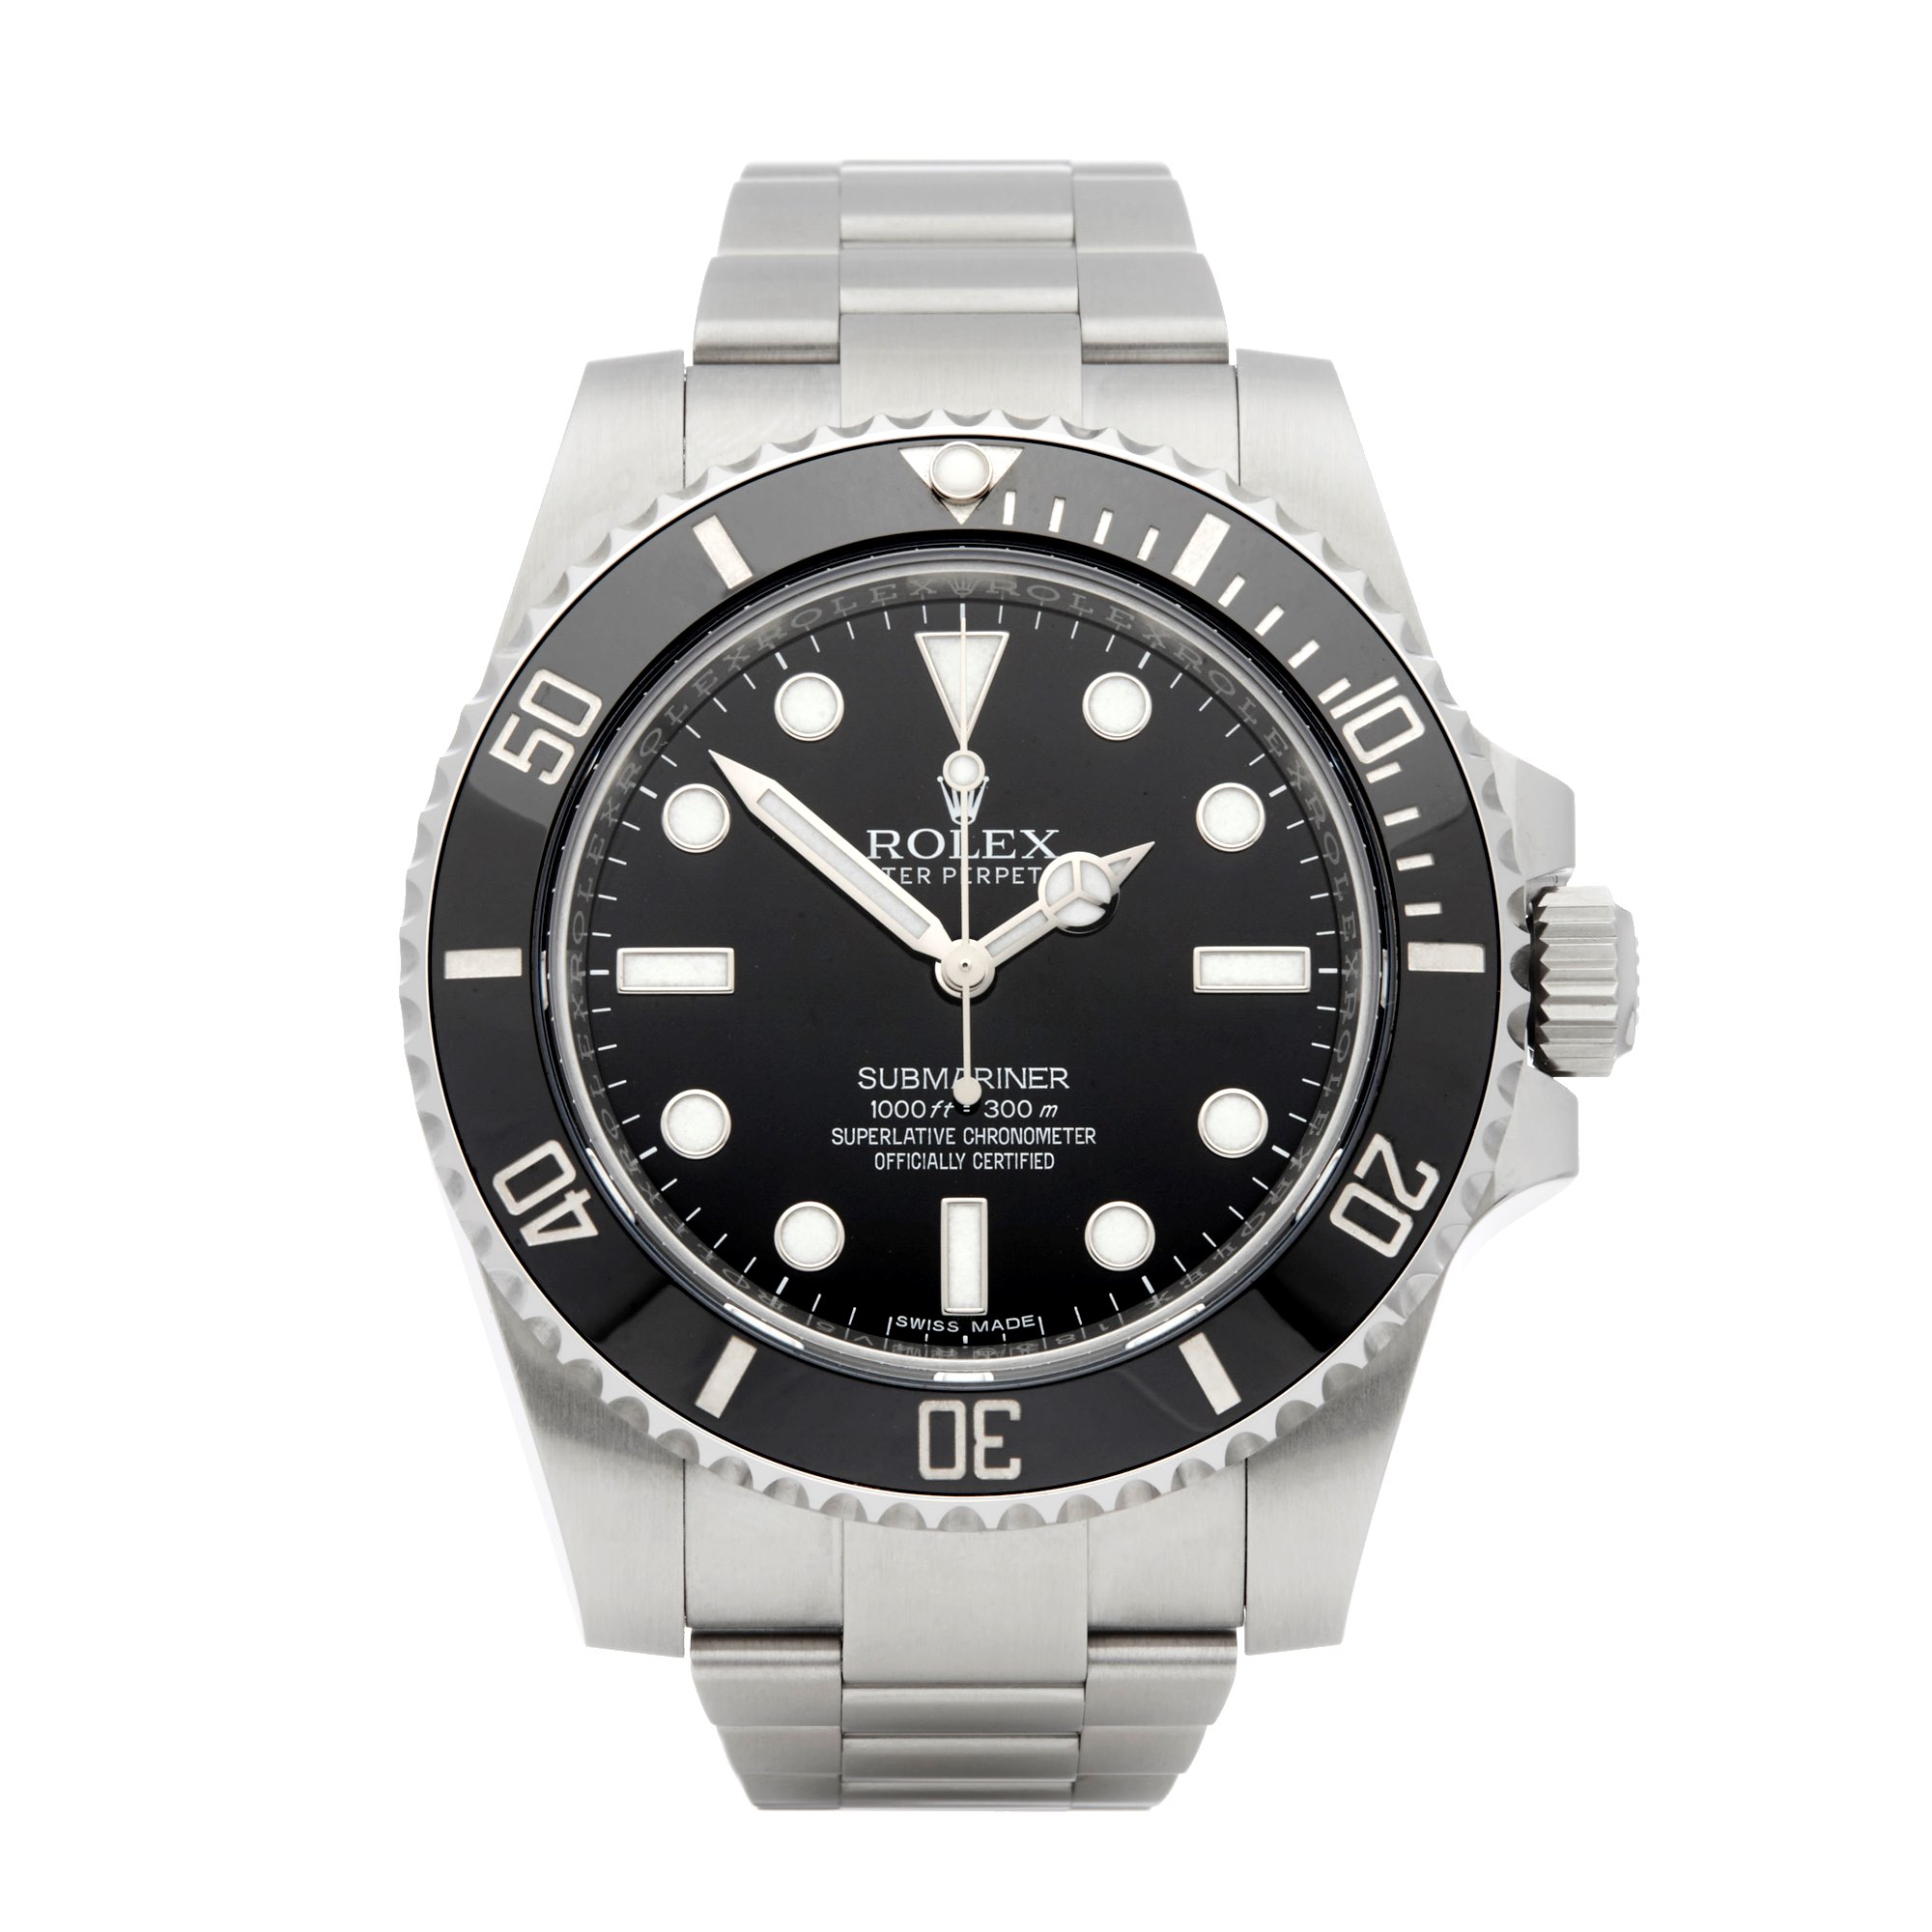 Pre-owned Rolex Watch Submariner 114060 